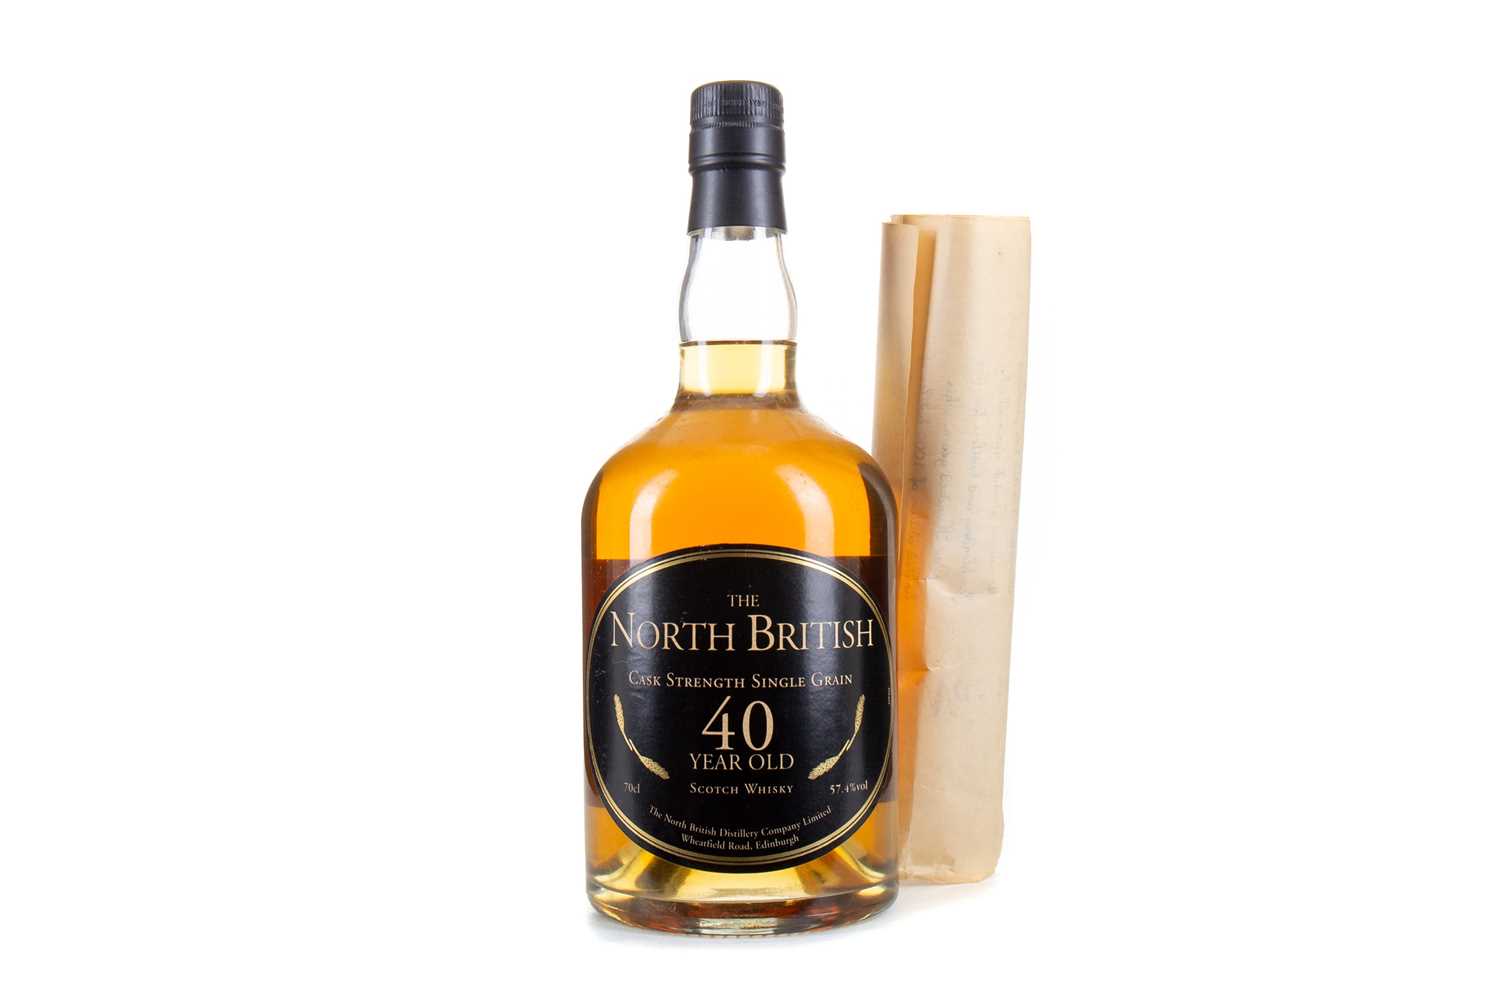 Lot 174 - NORTH BRITISH 40 YEAR OLD CASK STRENGTH